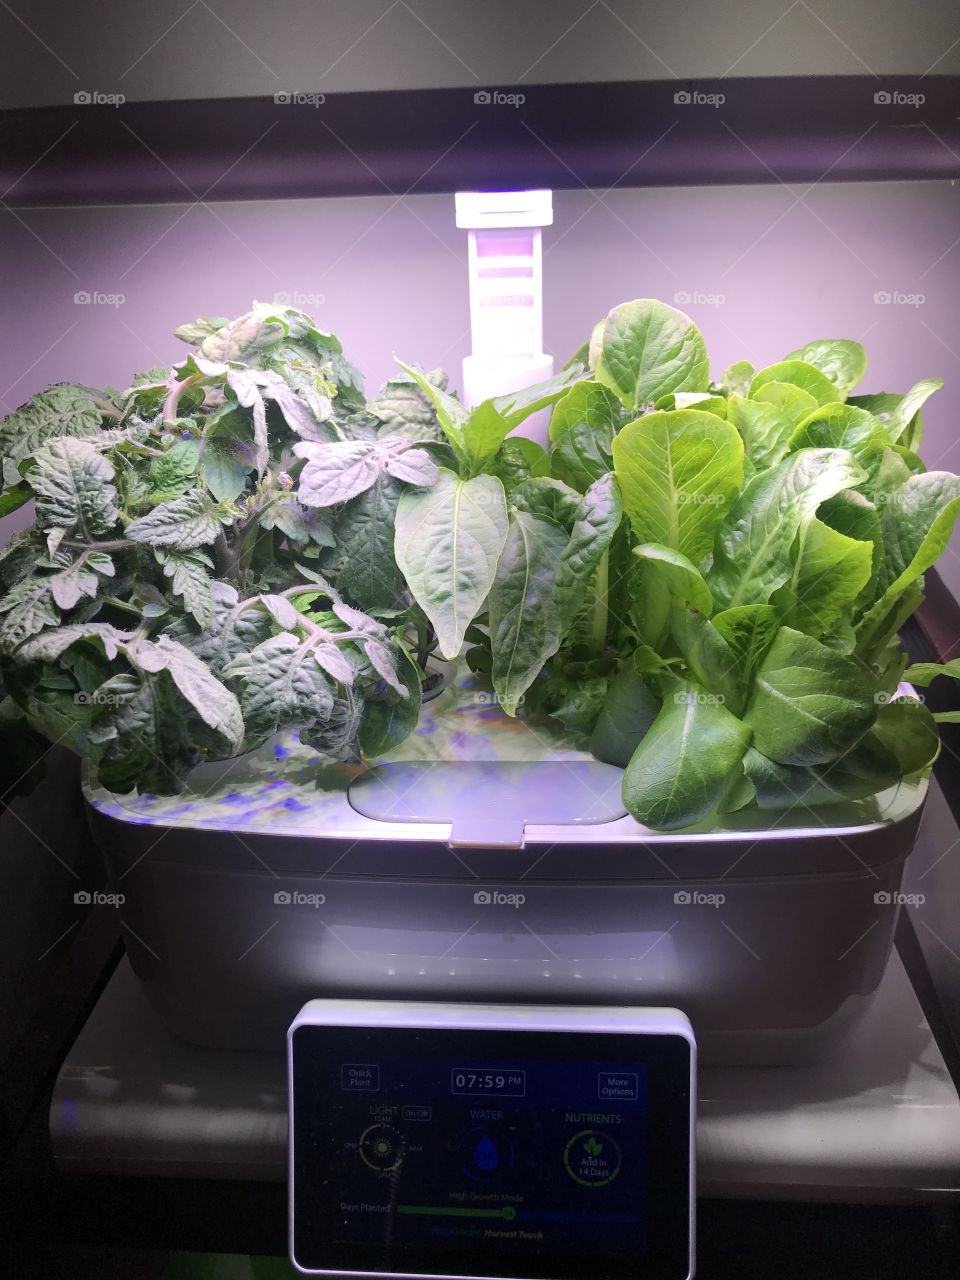 Cherry tomato plant and romaine lettuce growing in a Aerogarden indoor system. This is only 20 days and still growing. 